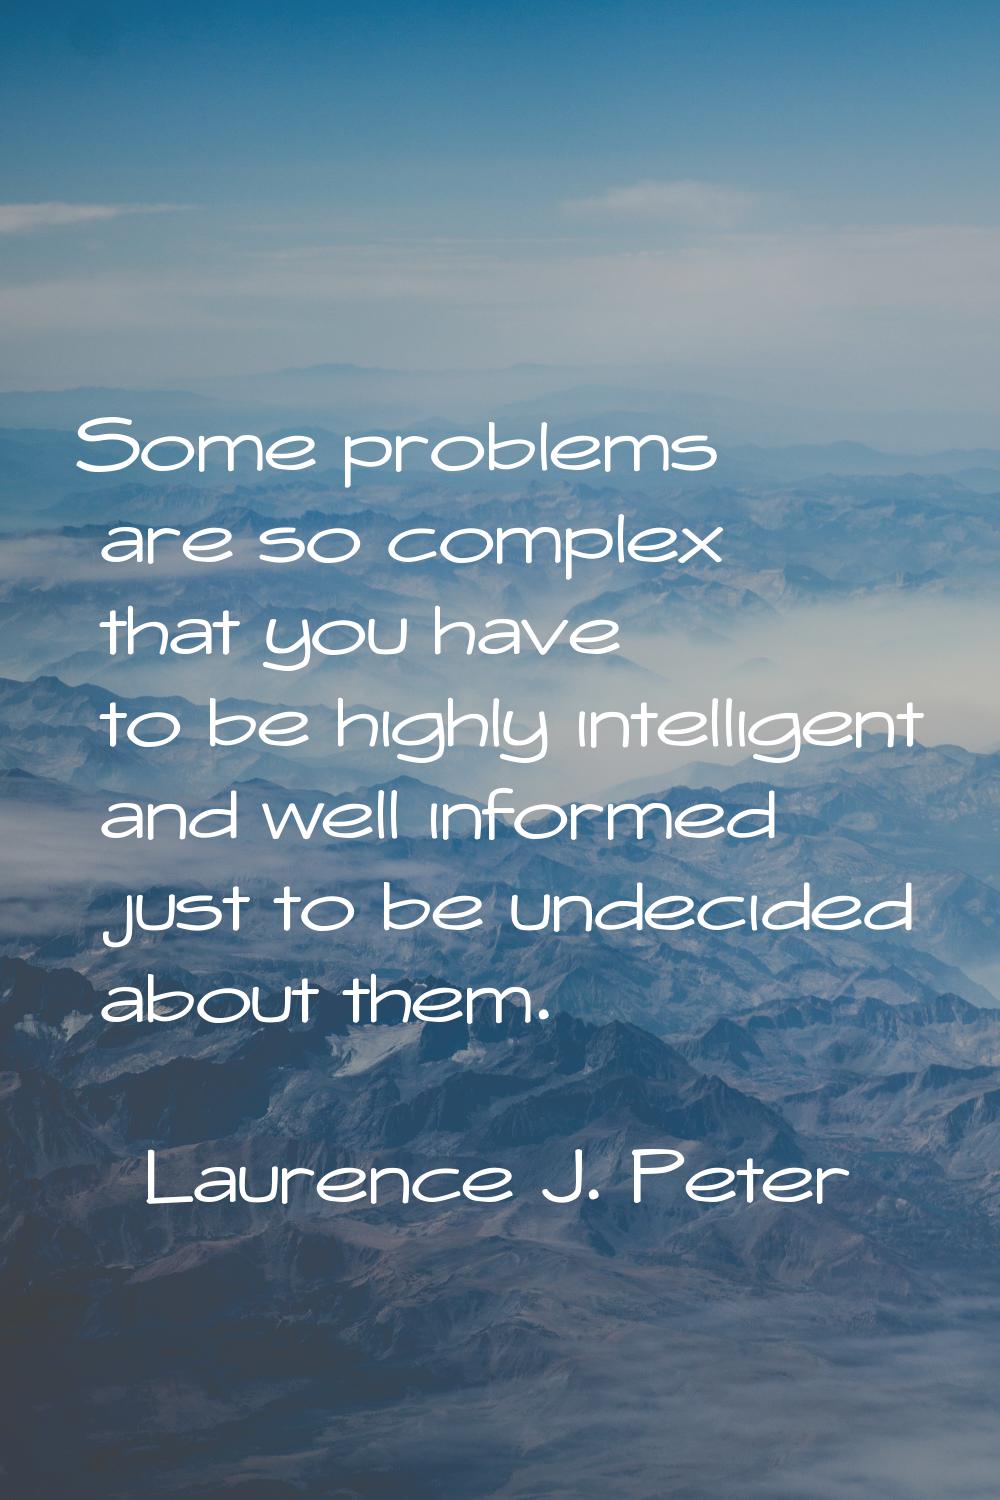 Some problems are so complex that you have to be highly intelligent and well informed just to be un